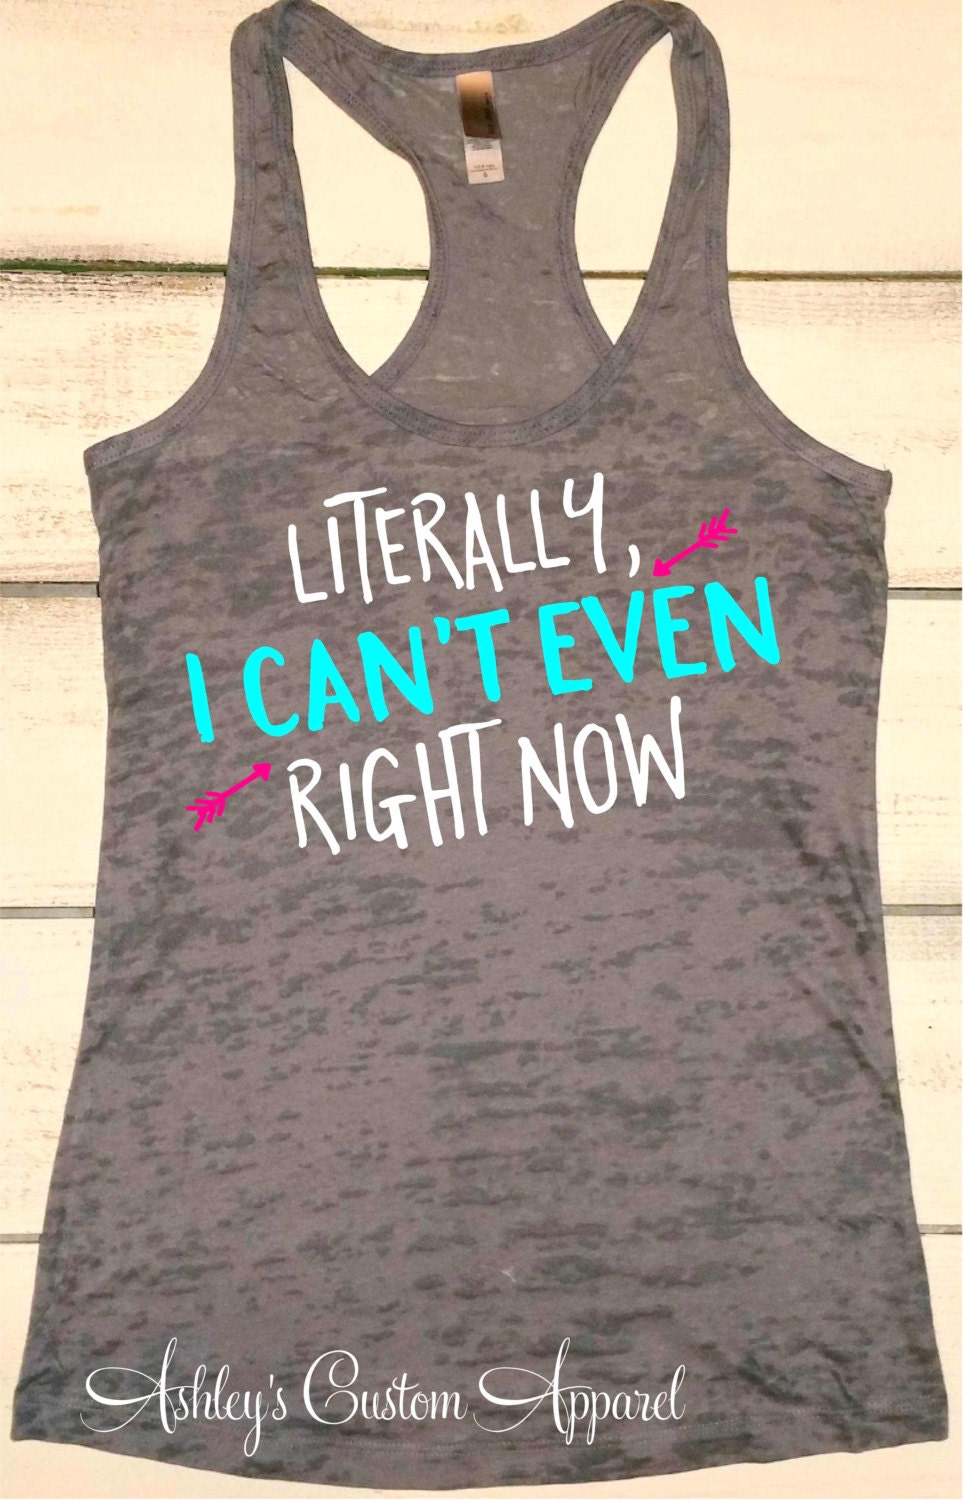 Cant Even Tank Funny Workout Tank Shirts with Sayings